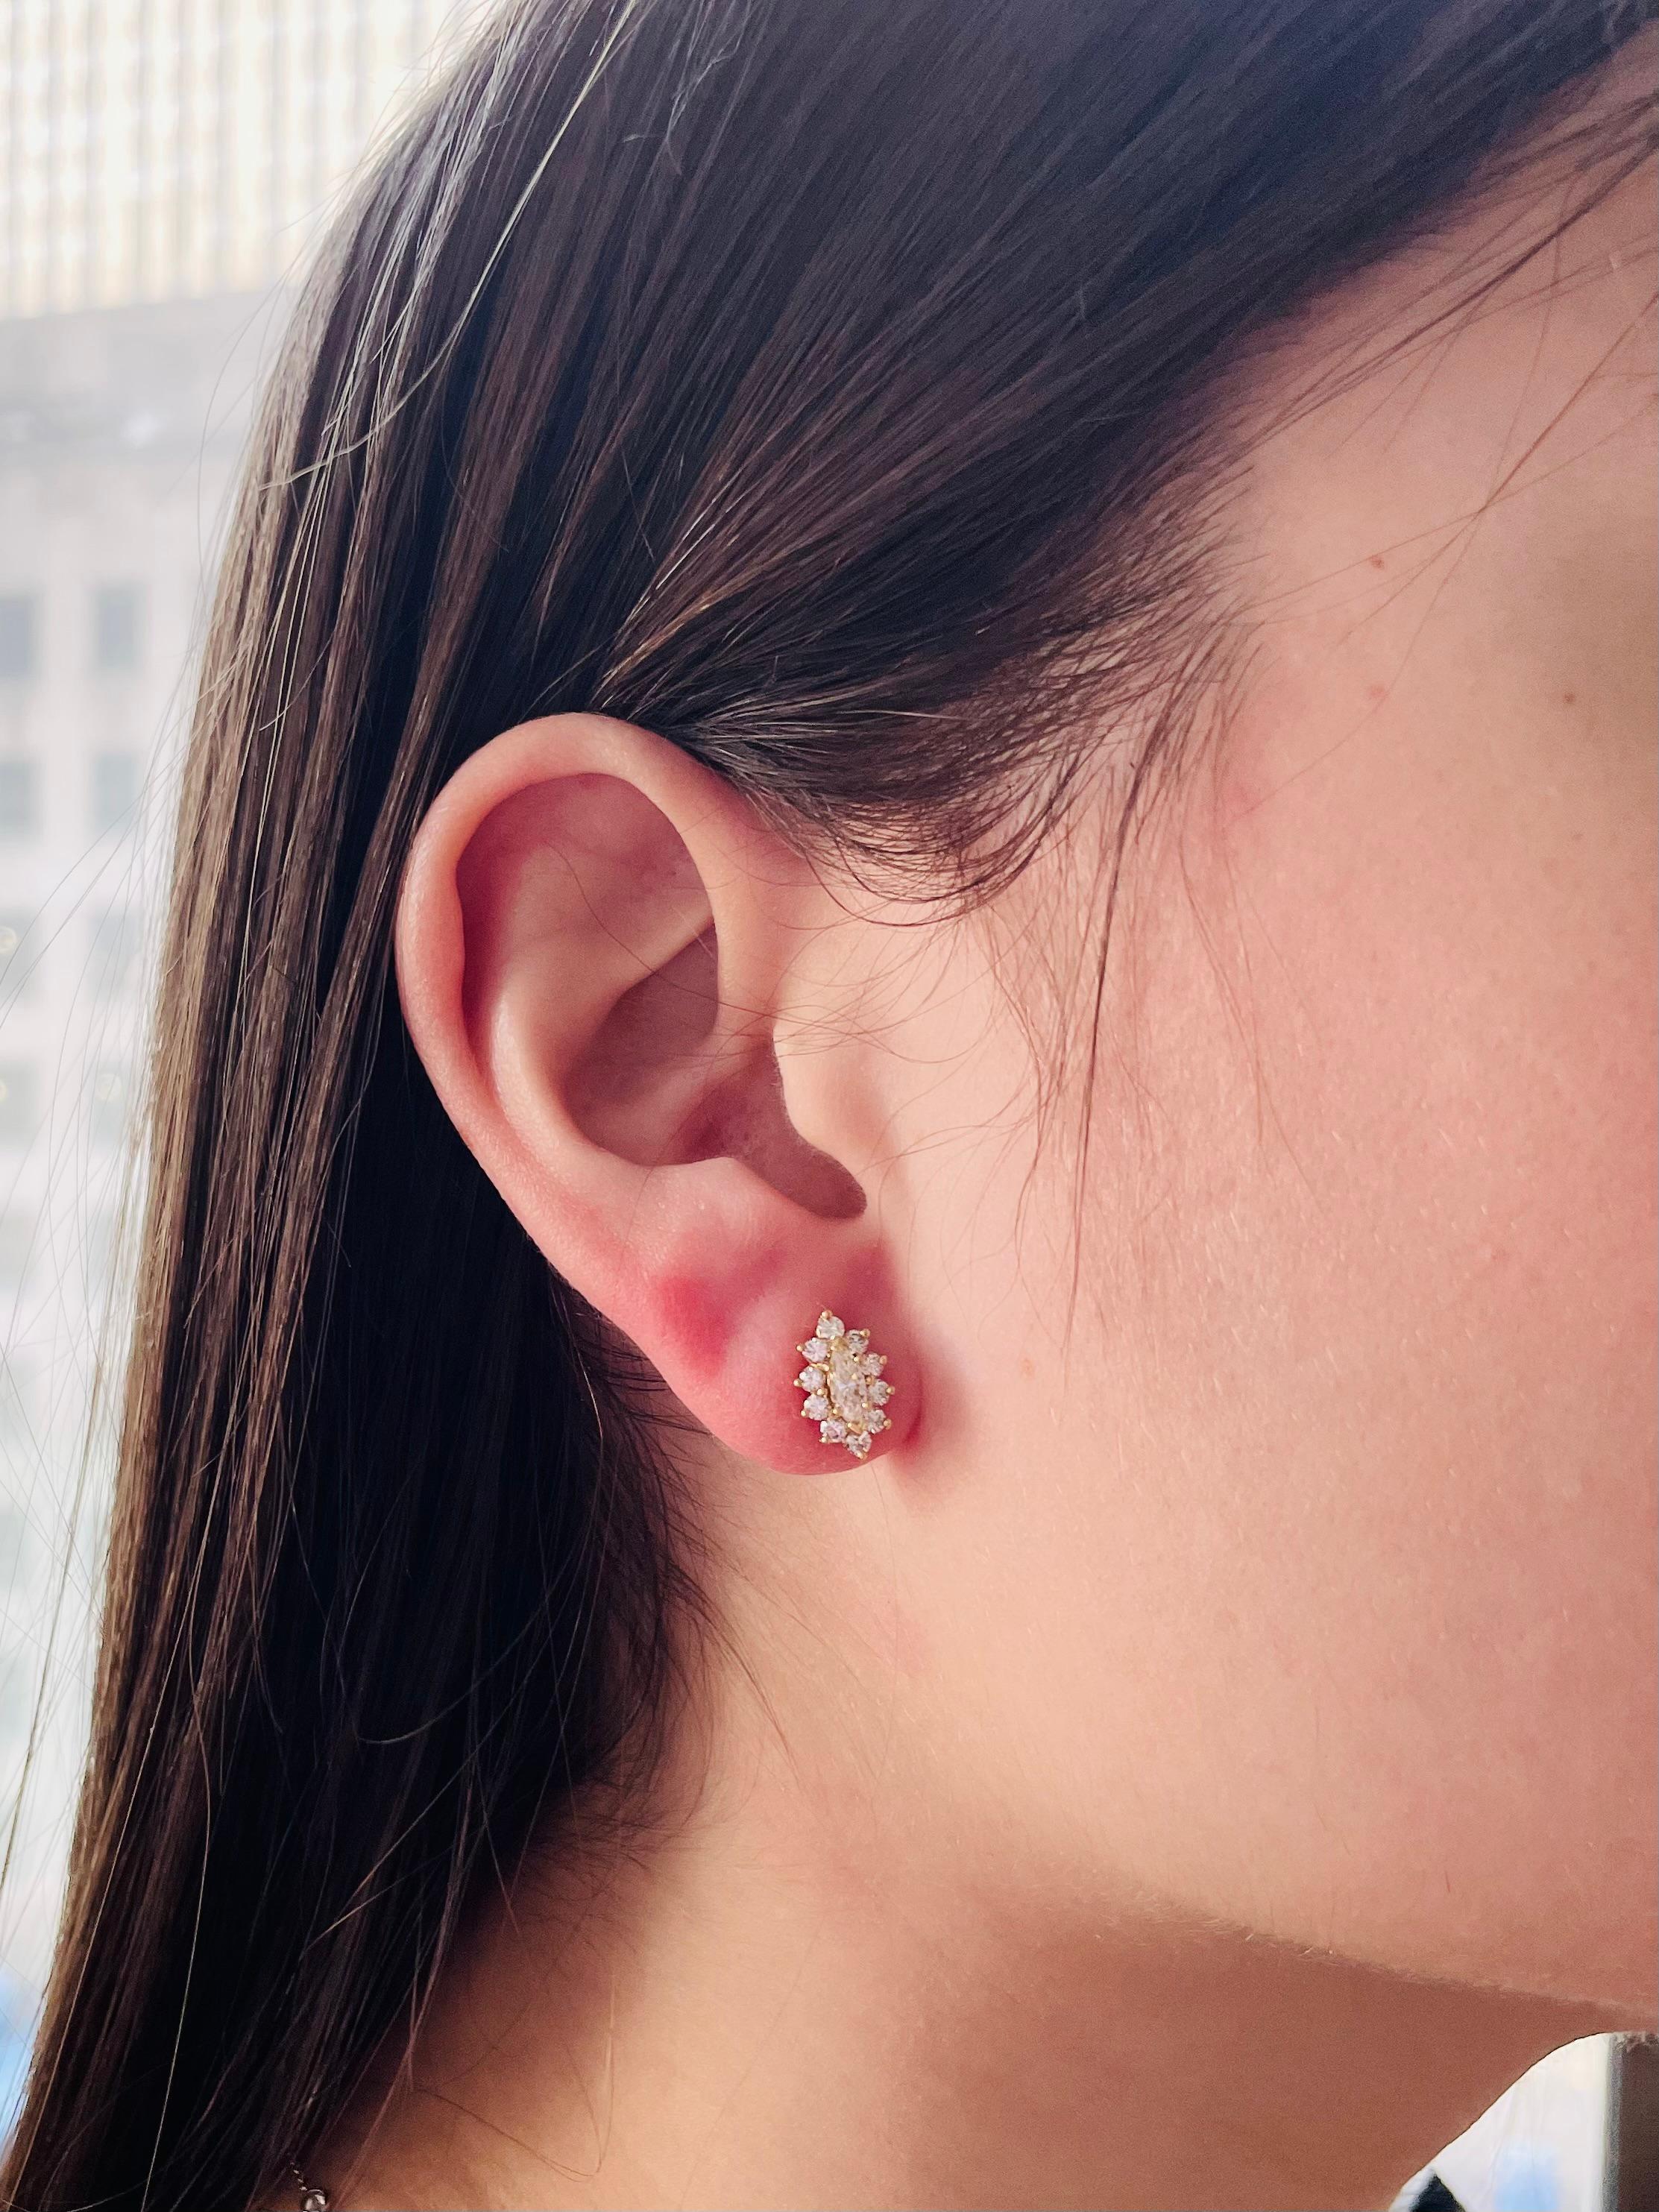 These sparkling studs are a statement on their own or a great addition to your ear stack! Crafted in 18K yellow gold, these earrings feature two marquise shape diamonds (total 0.41 carats) surrounded by a halo of round diamonds (total 0.68 carats).